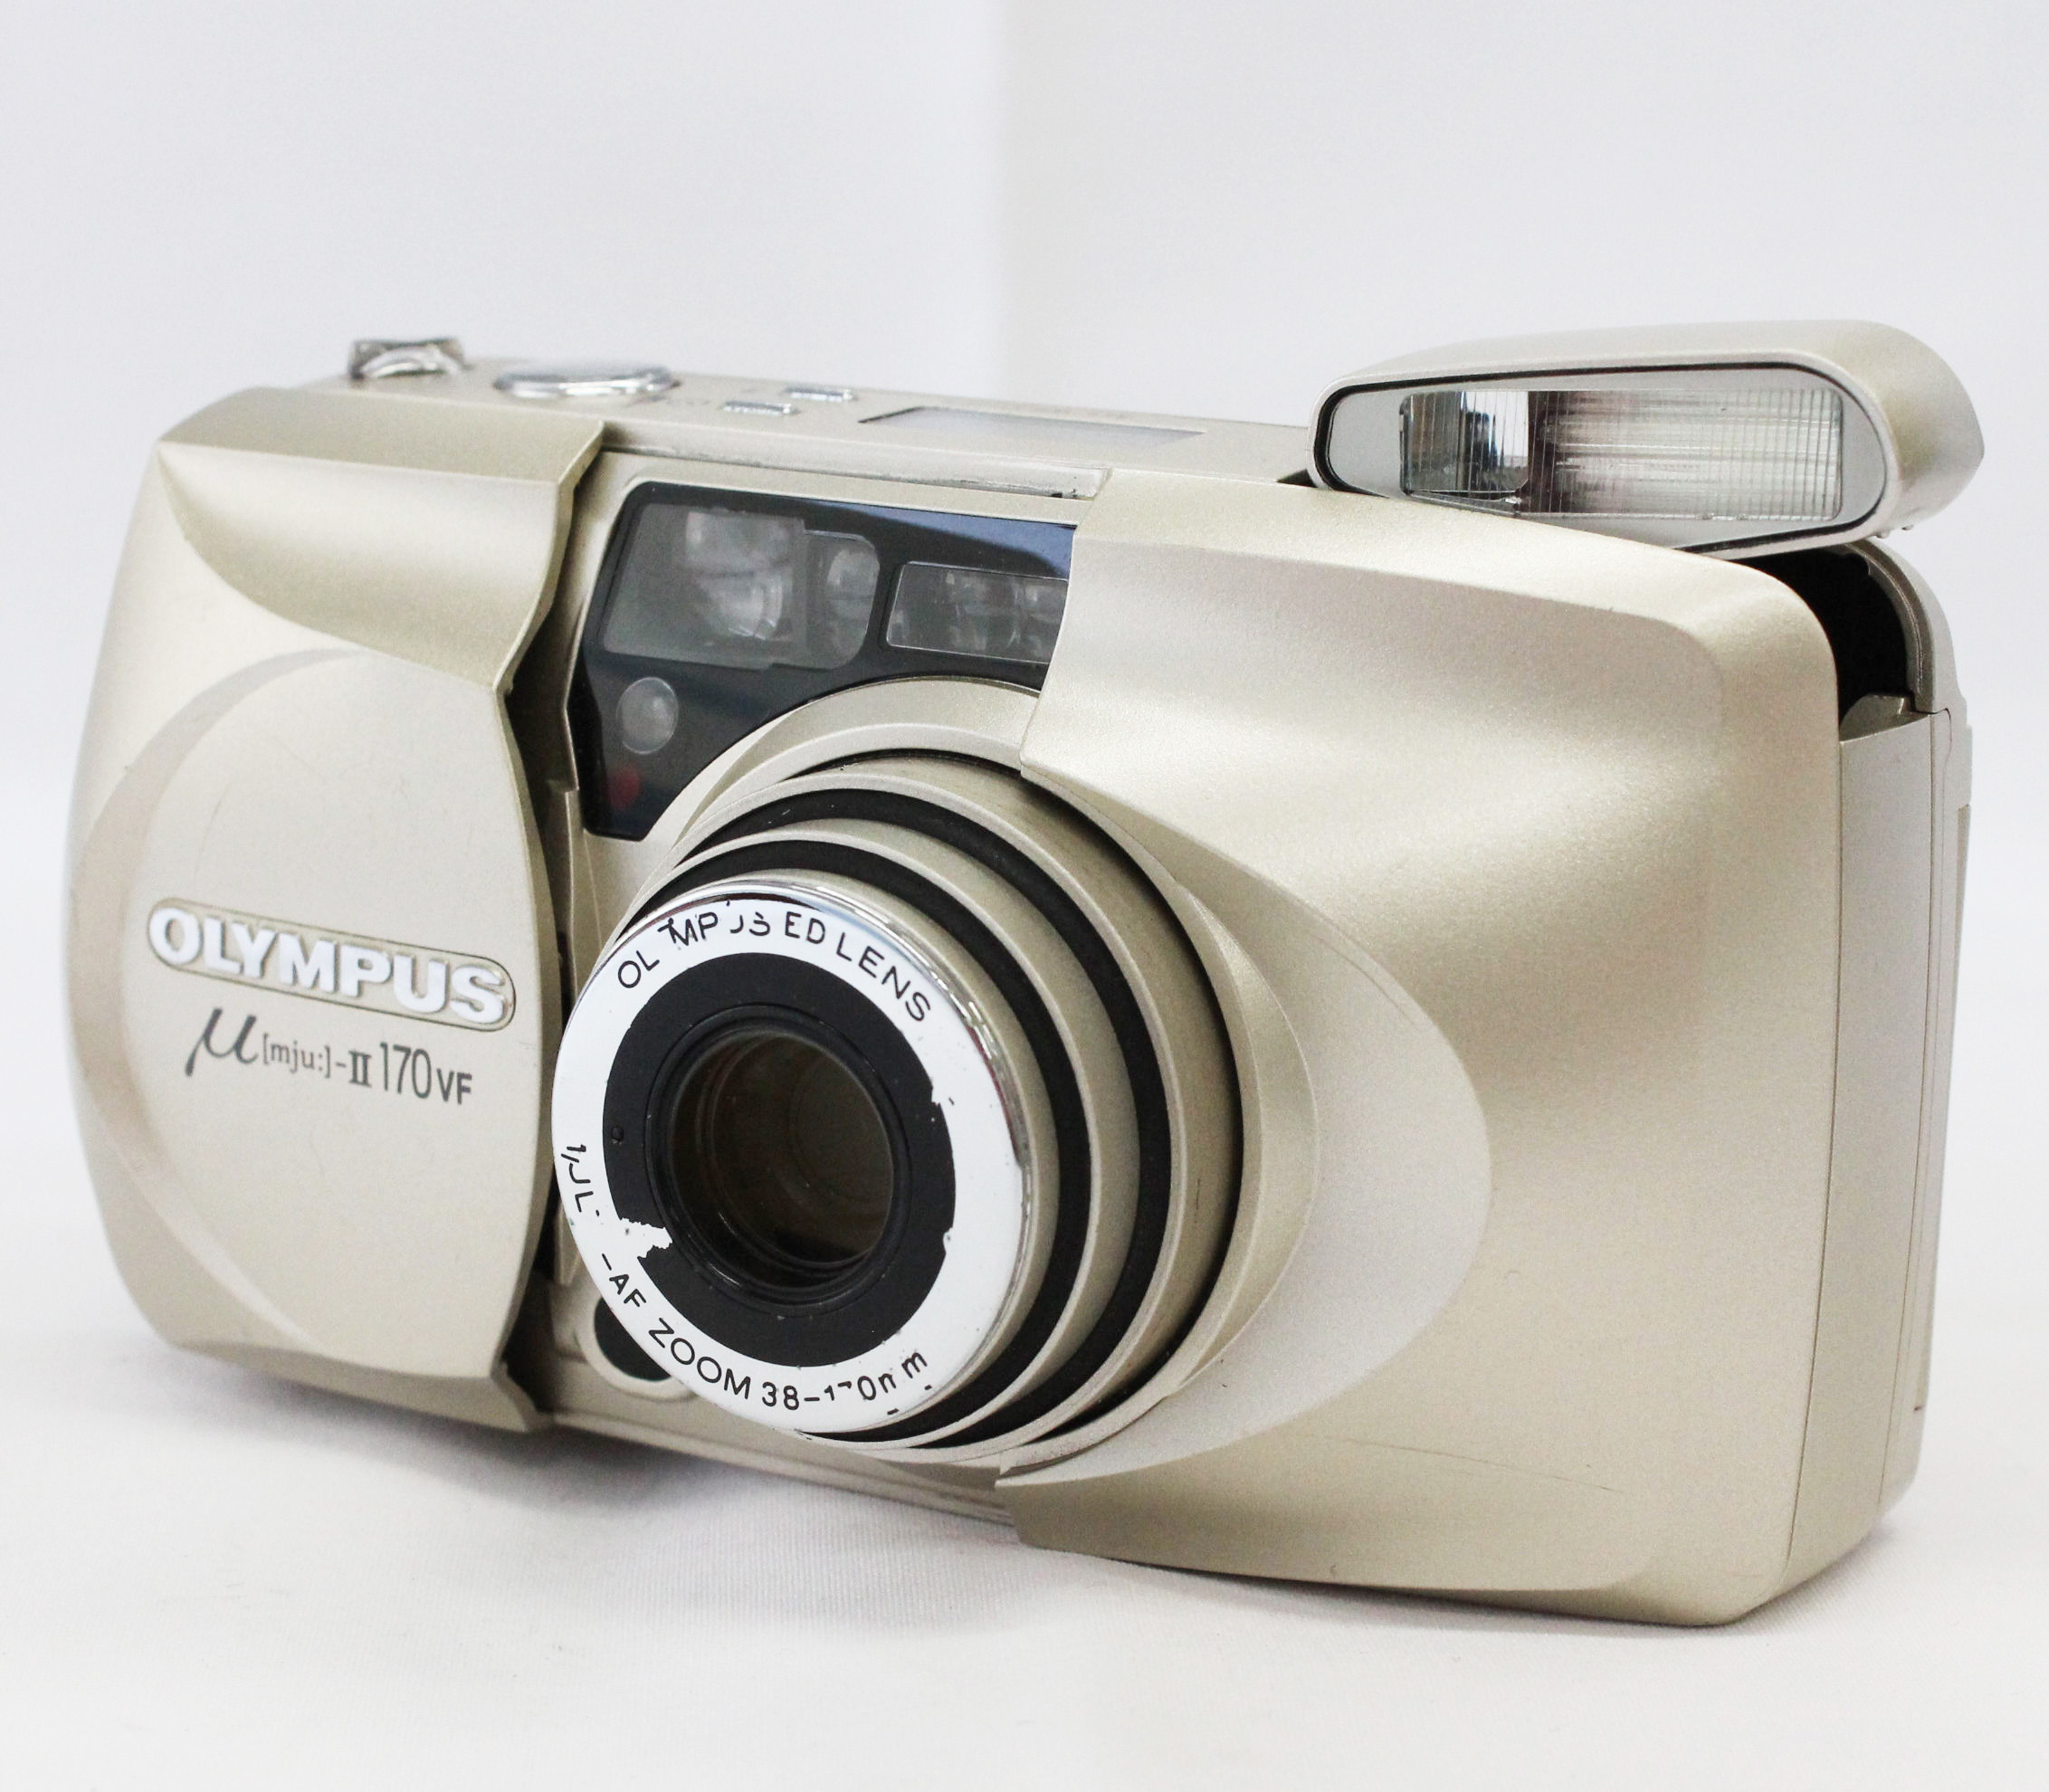 Japan Used Camera Shop | [Exc+++++] Olympus μ MJU II 170 VF Multi-AF Zoom 35mm Point & Shoot Film Camera with Remote Control RC-300C from Japan